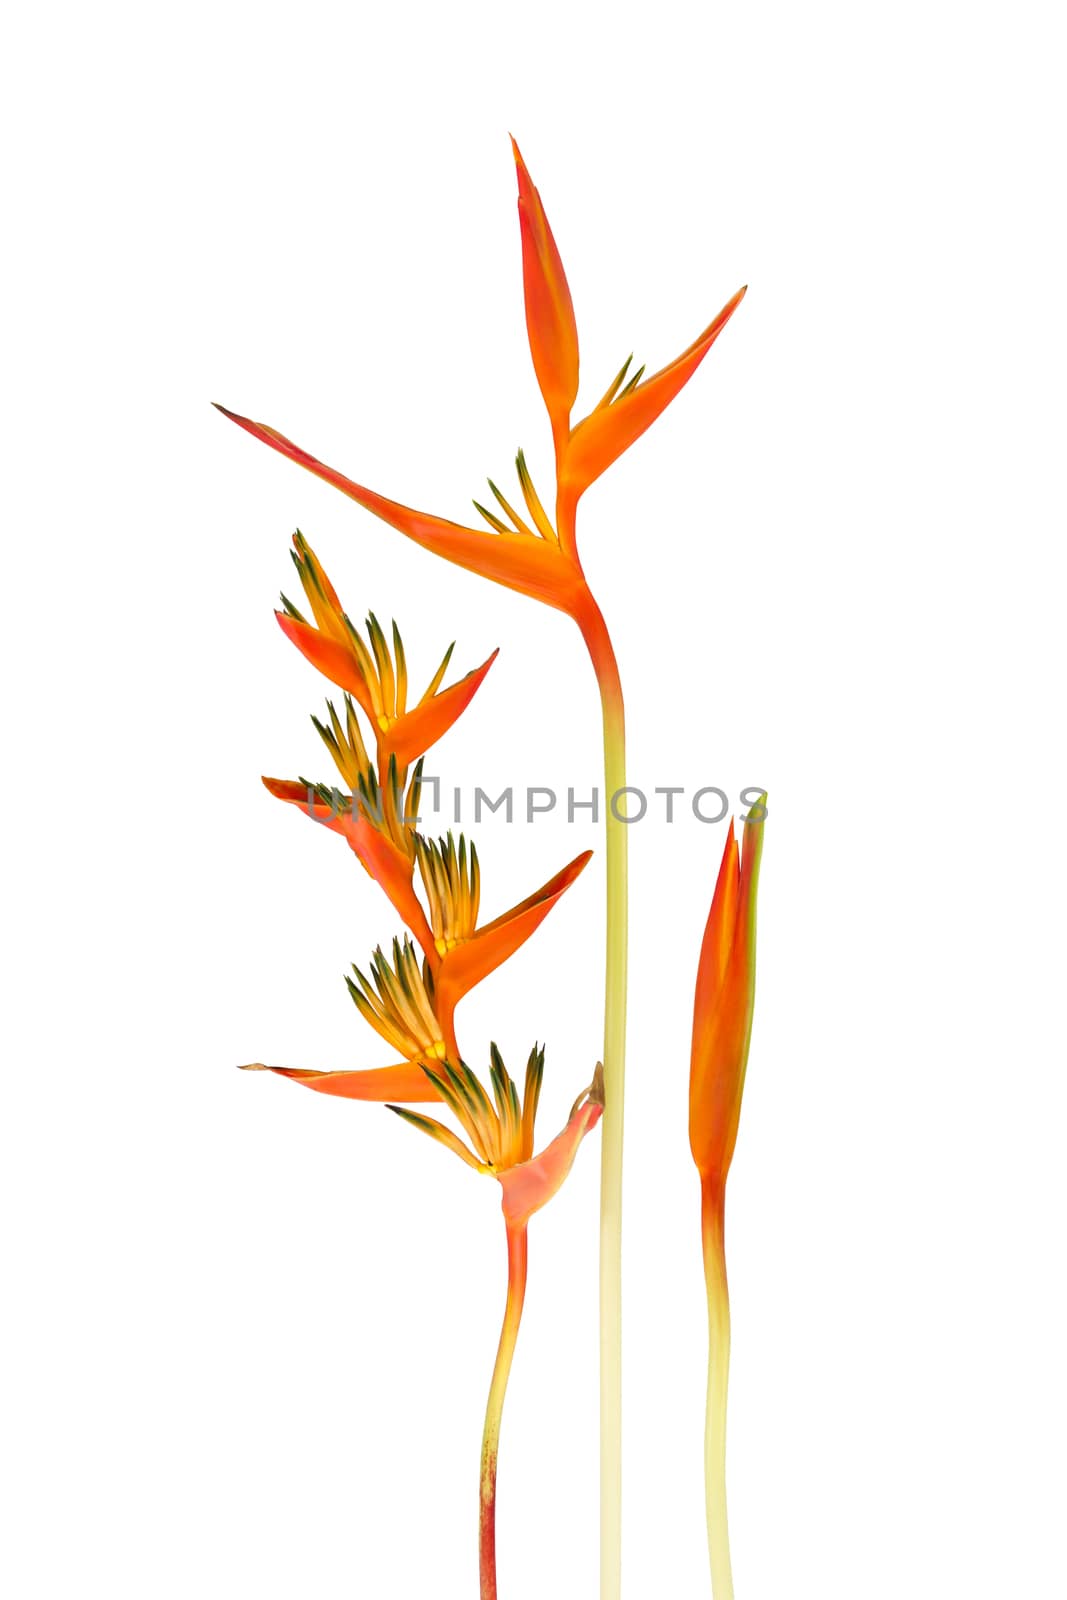 Beautiful Red, Yellow And Orange Heliconia (Heliconia Spp.) Flower Isolated On White Background, Tropical Vivid Color Flower And Leaf On White Background, Heliconia Or Bird Of Paradise Flower by rakoptonLPN